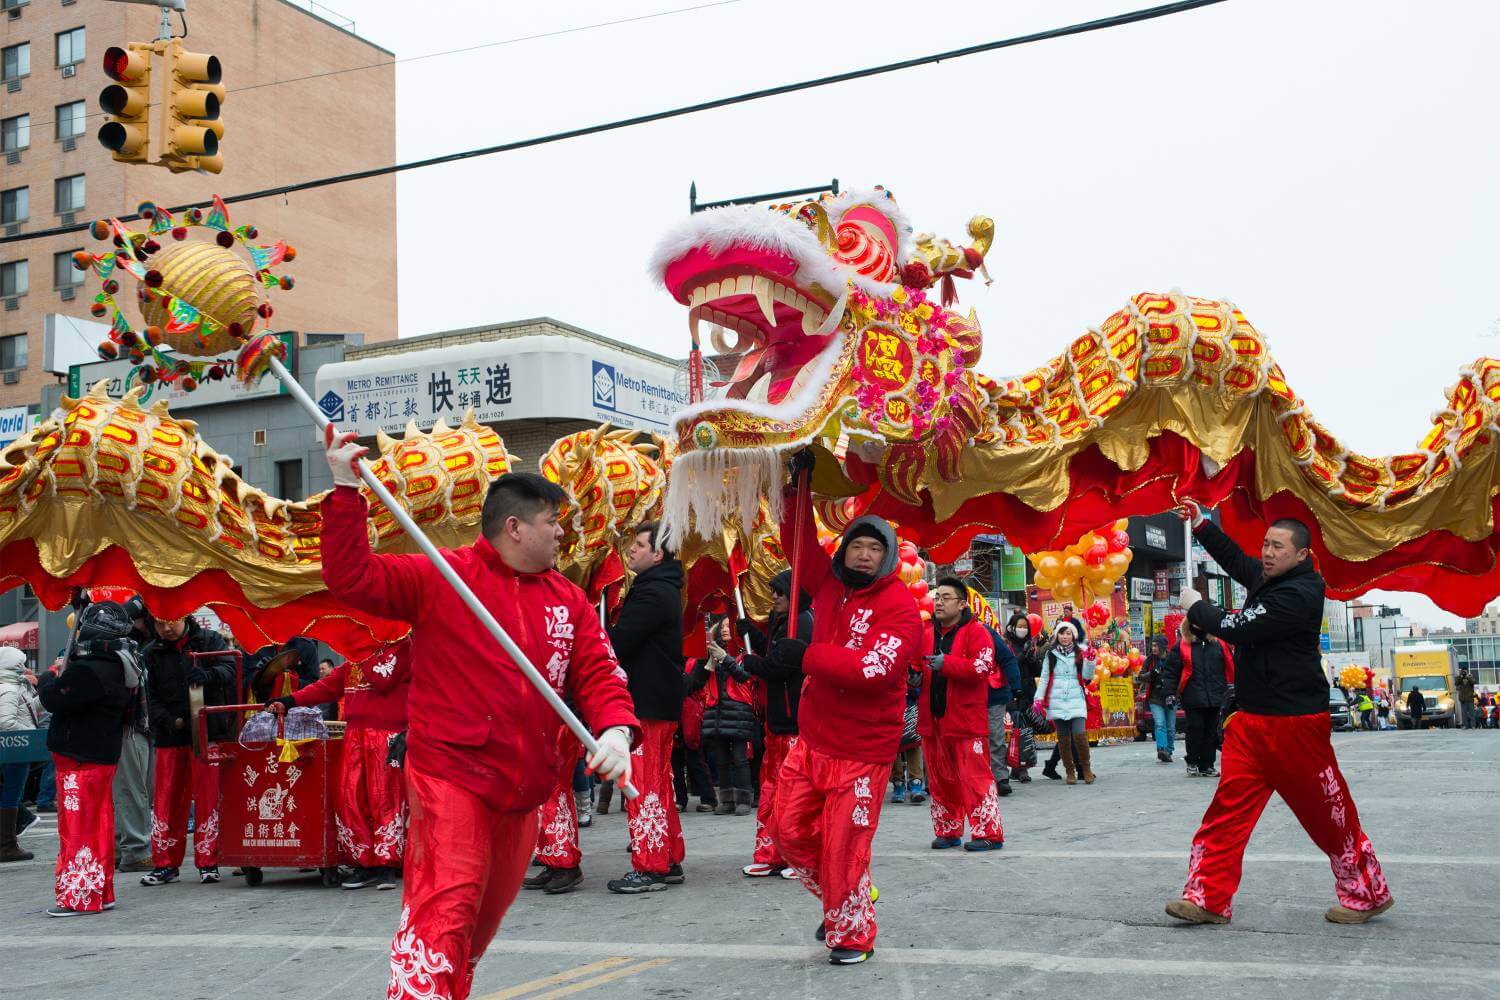 The Greater Flushing Chamber of Commerce in the 2020 Lunar New Year Parade - Downtown Flushing